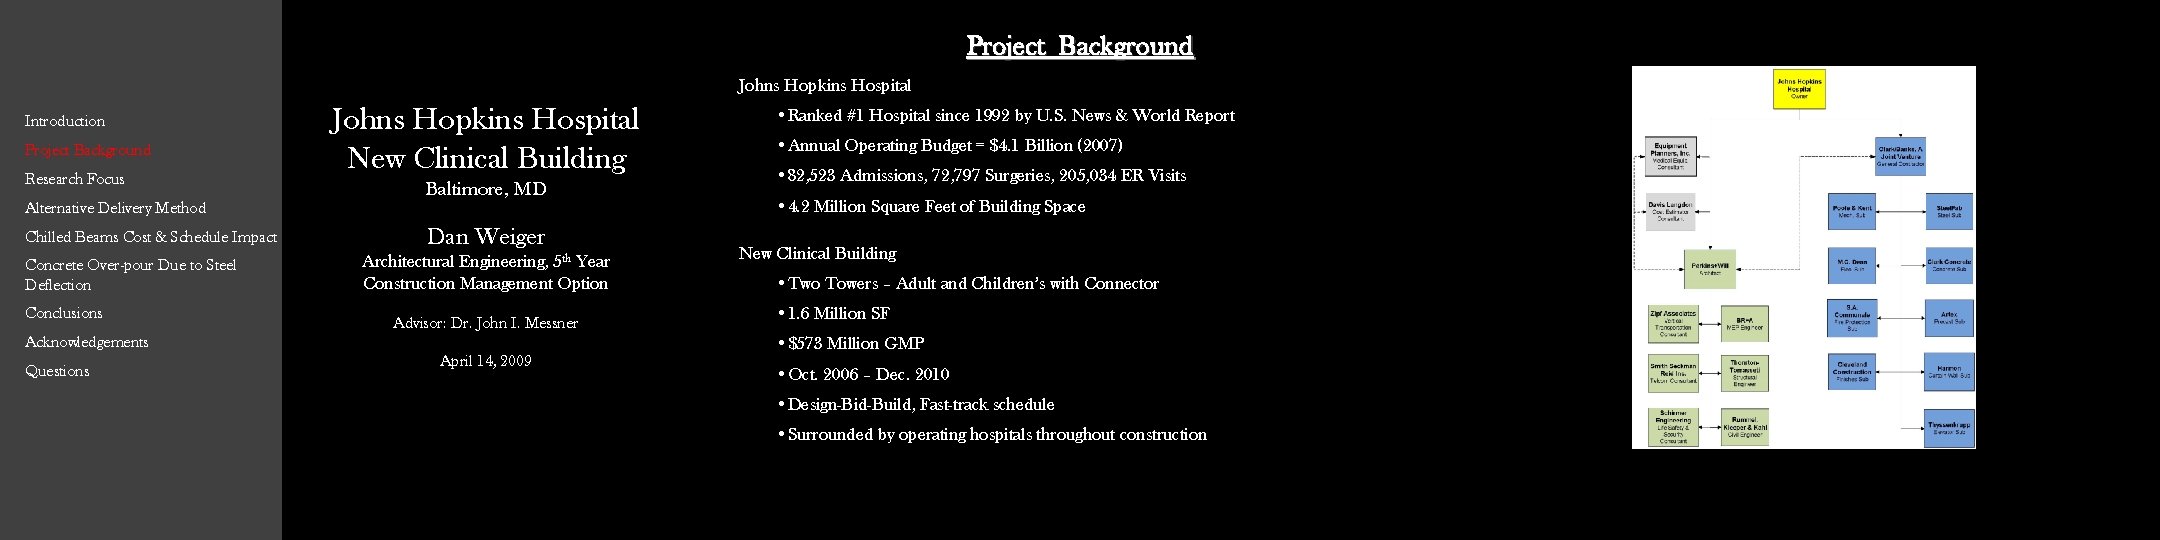 Project Background Johns Hopkins Hospital Introduction Project Background Research Focus Alternative Delivery Method Chilled